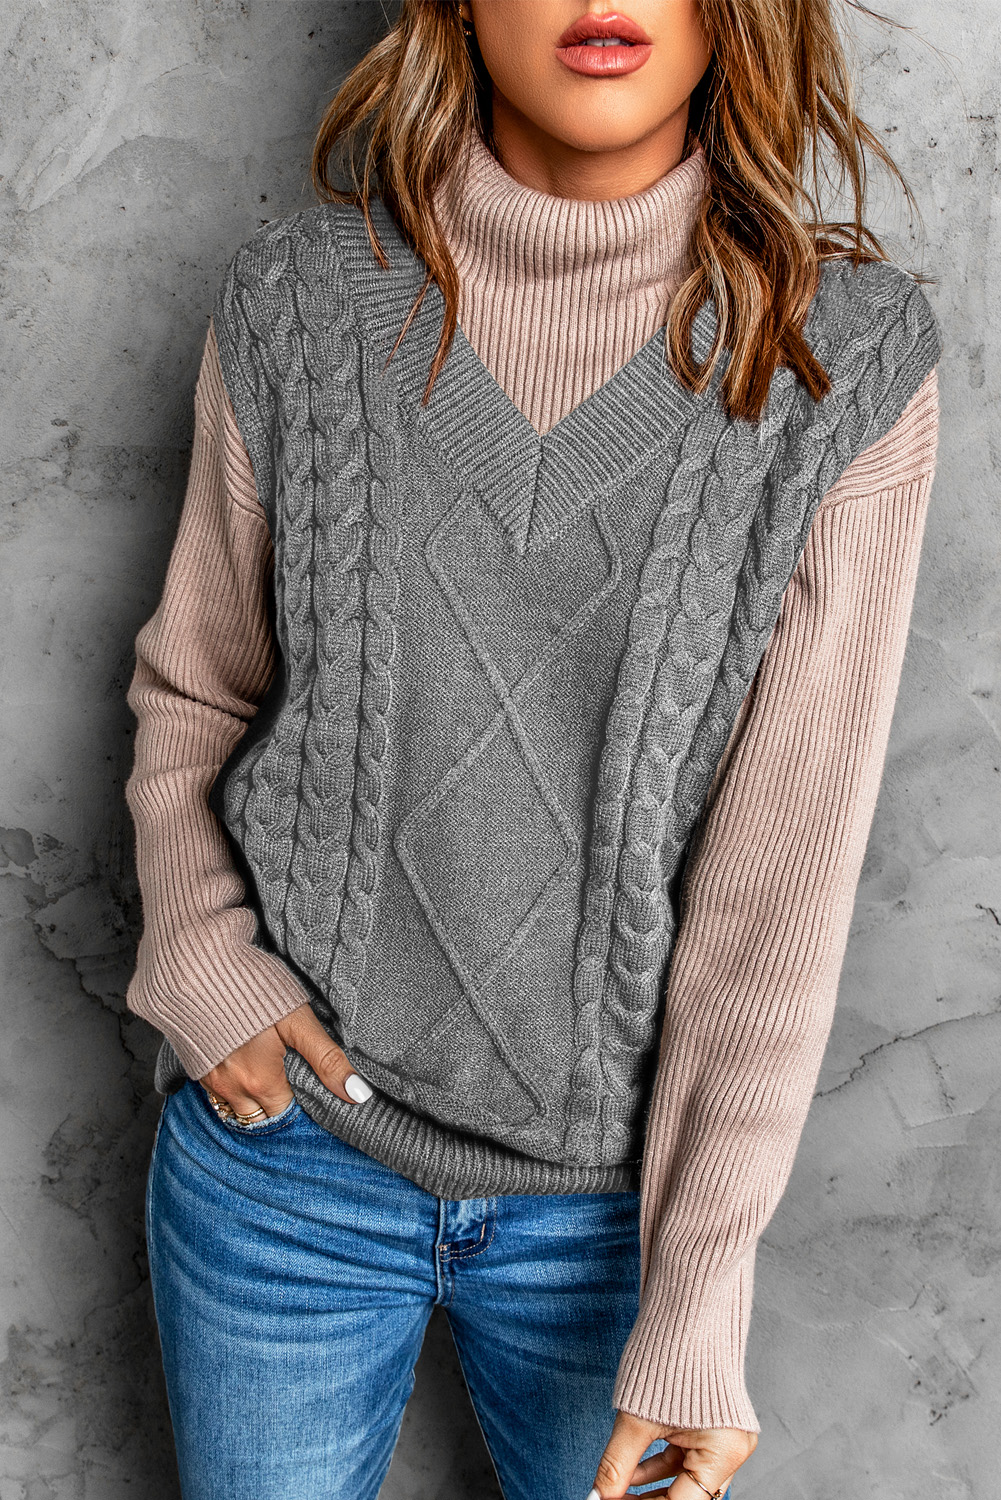 US$ 9.78 Drop-shipping Gray Sleeveless Cable Knitted Sweater Tank for Women